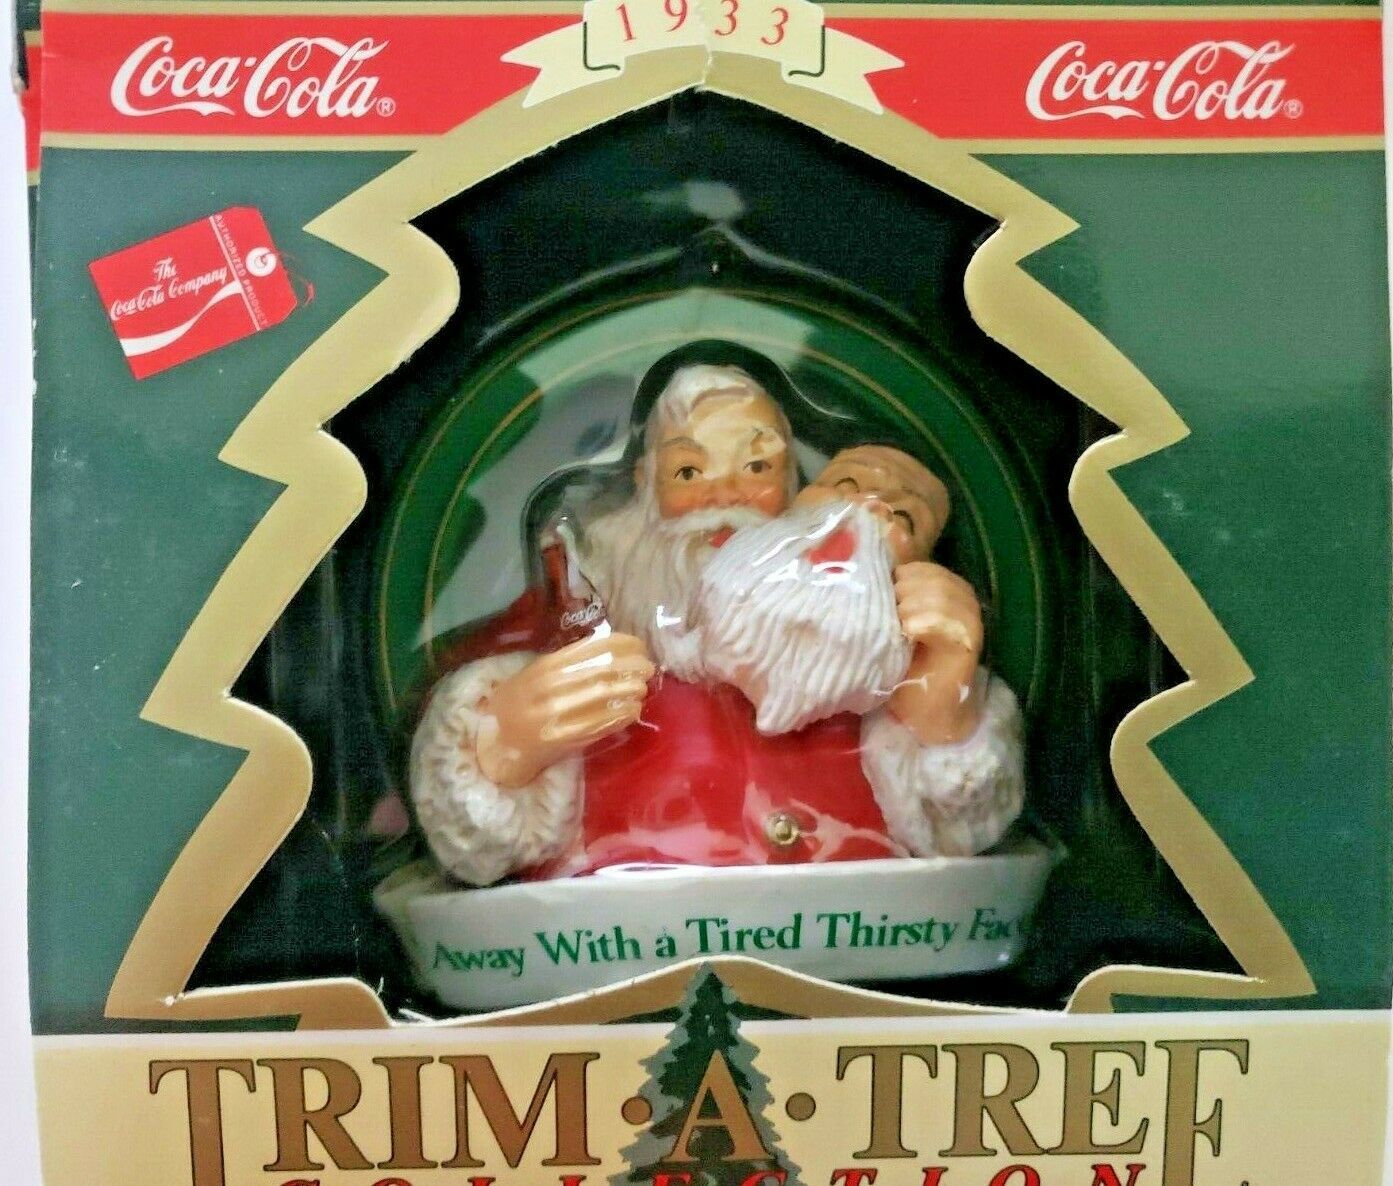 Primary image for 1933 Coca Cola Trim a Tree Collection Christmas Tree Ornament U72